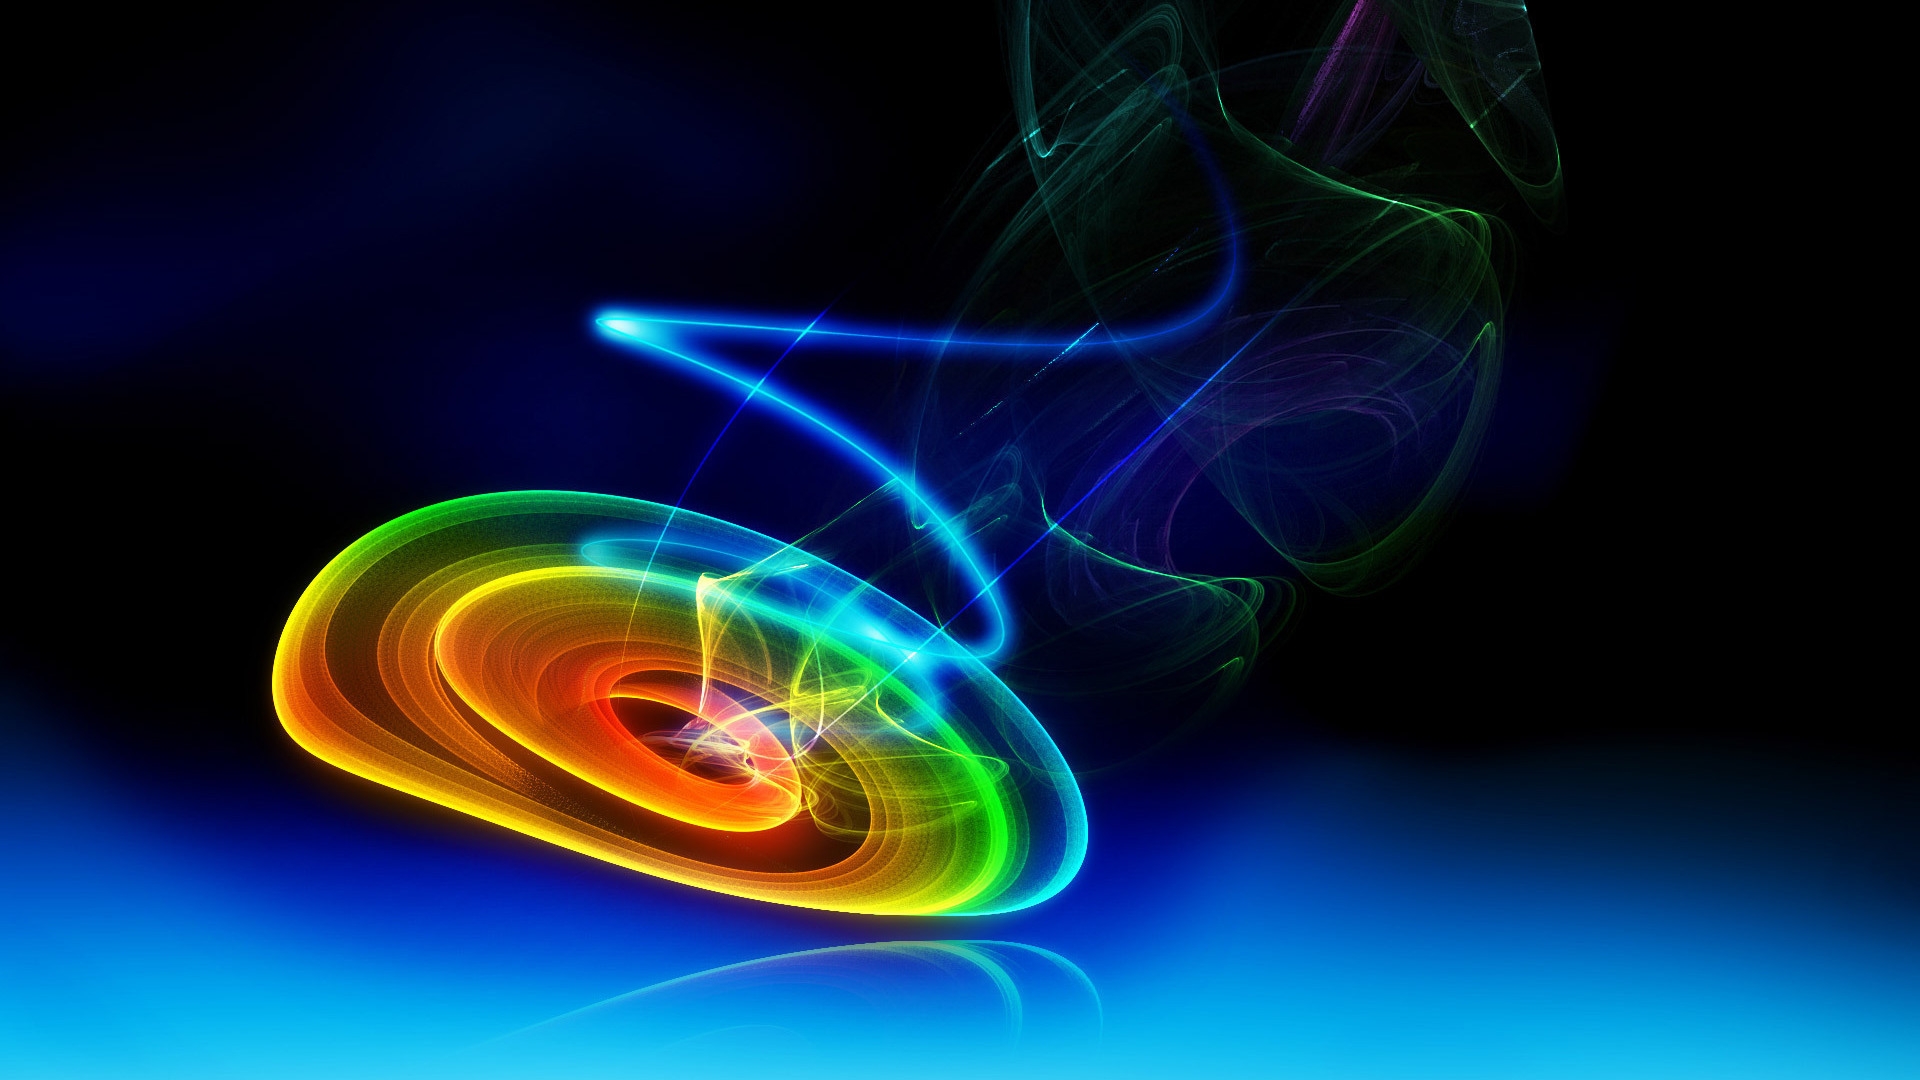 Stunning Abstract for 1920 x 1080 HDTV 1080p resolution